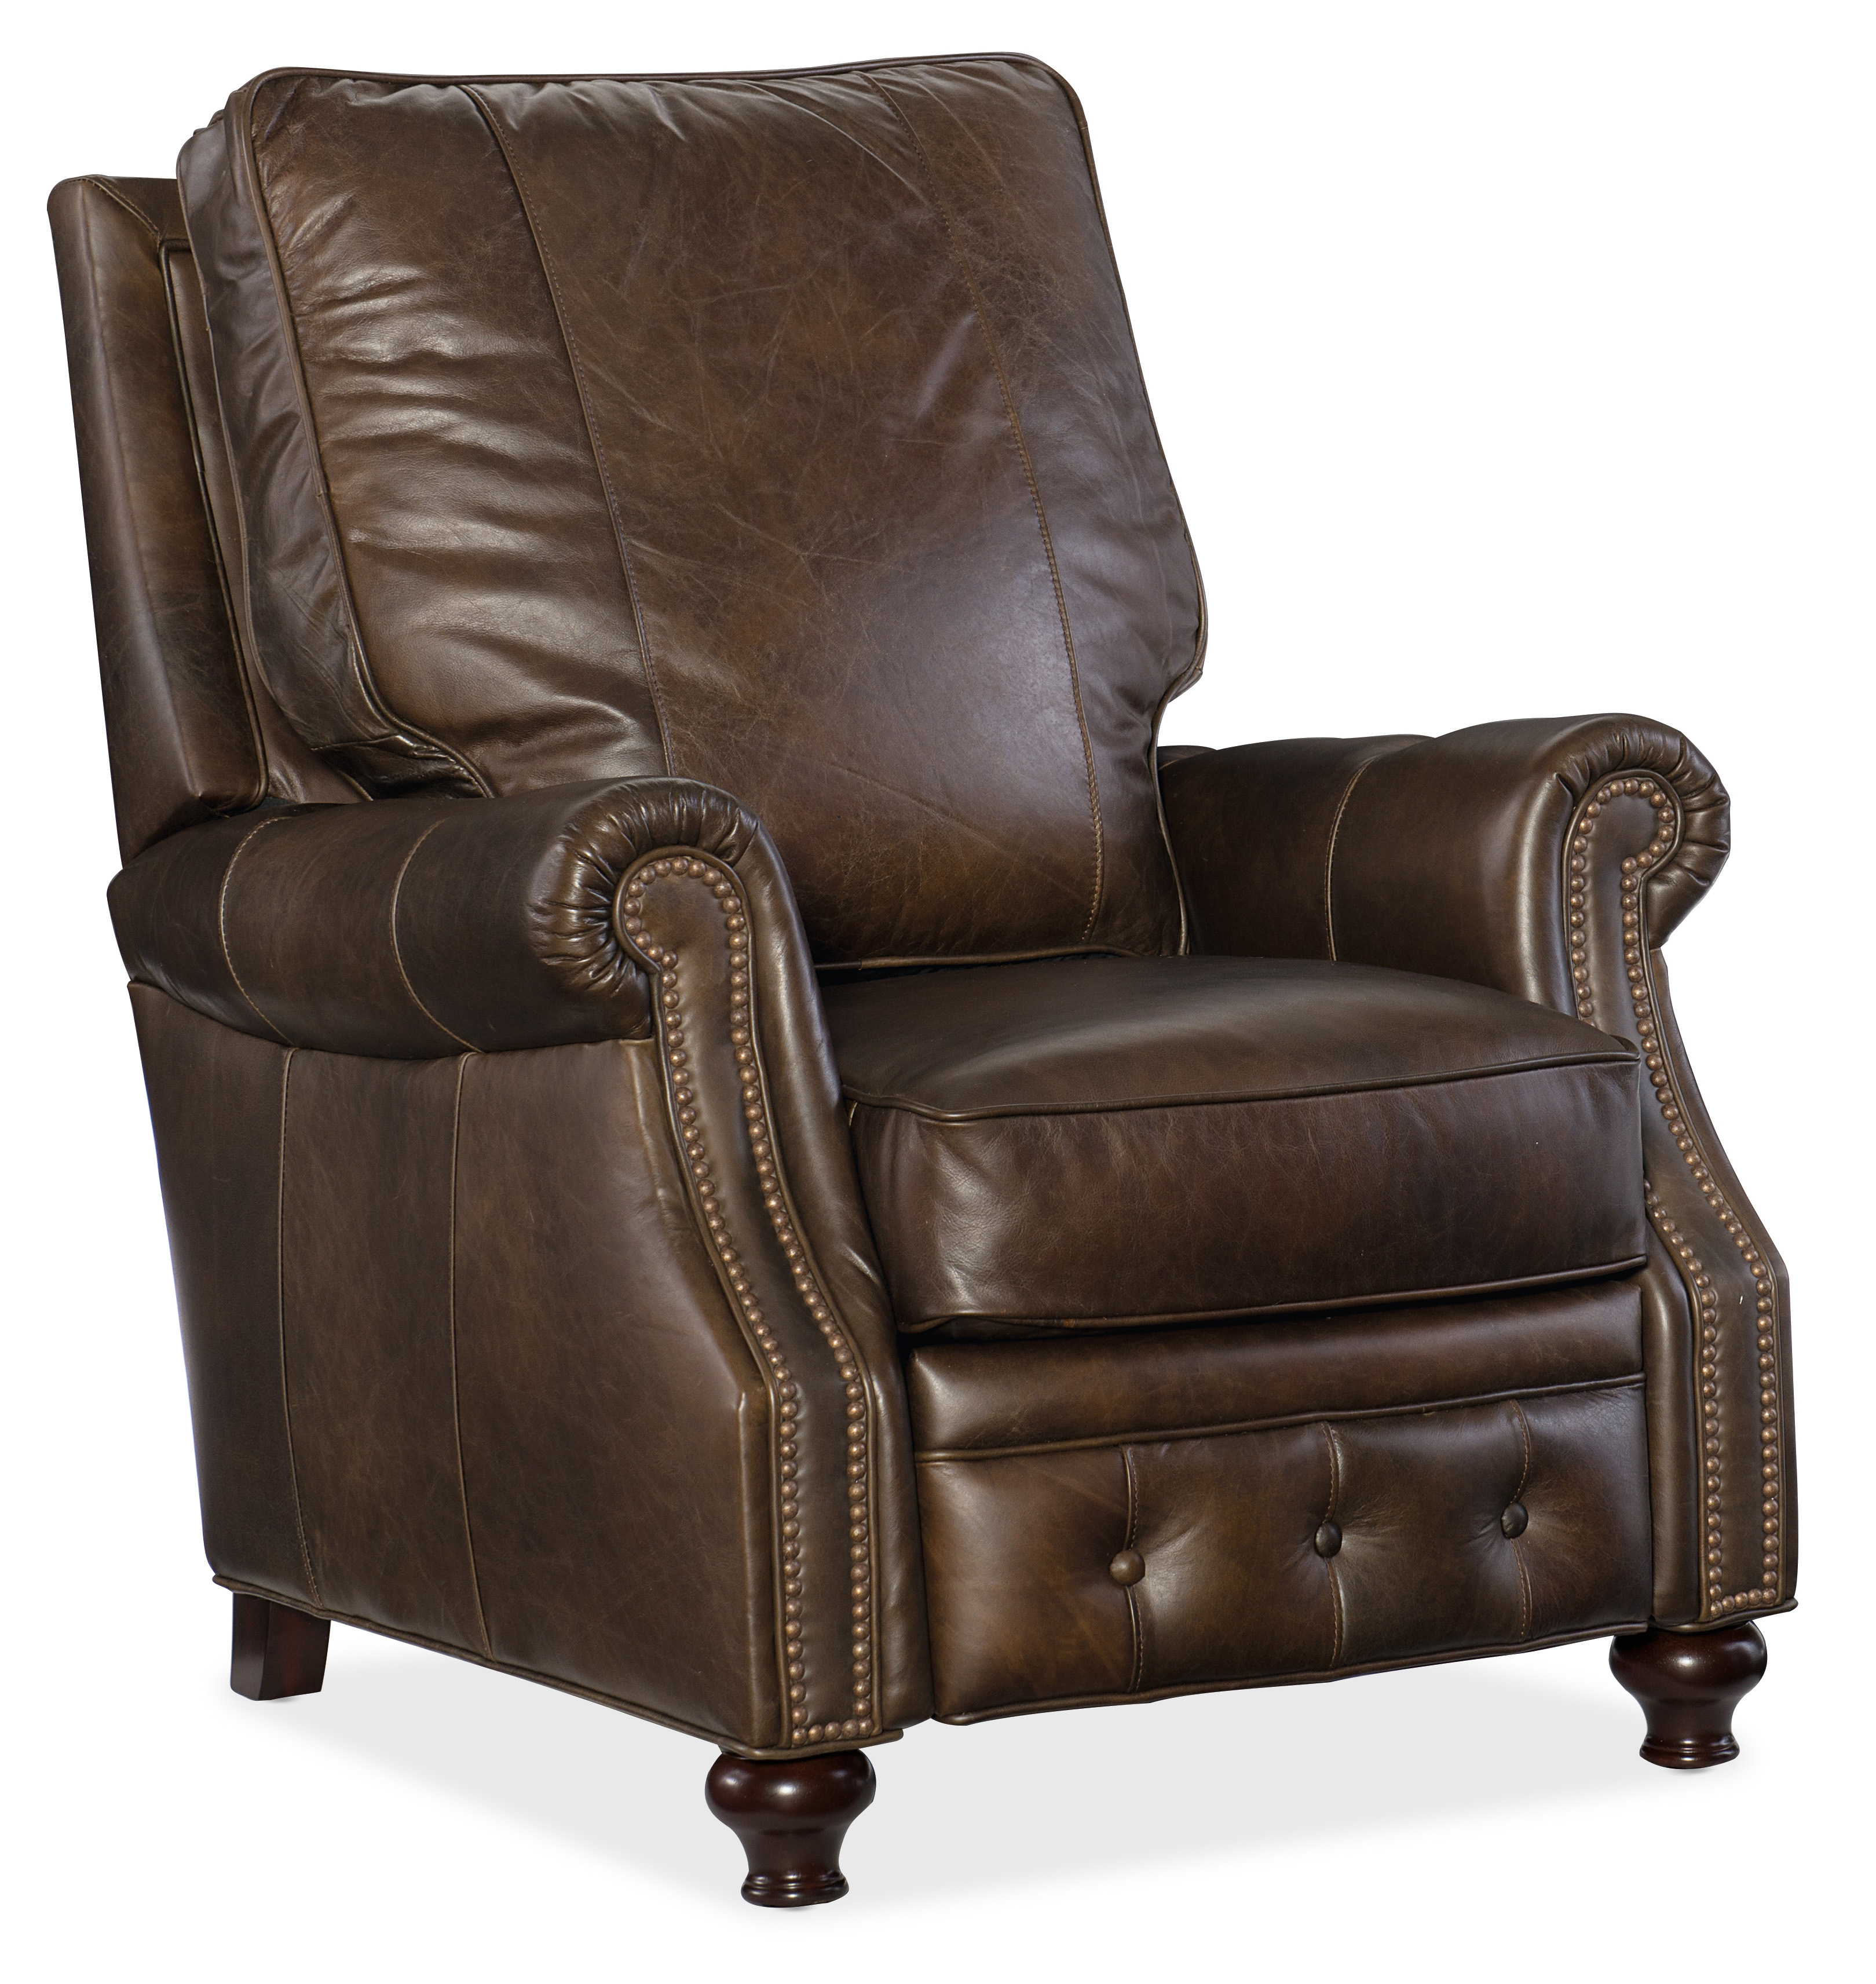 Picture of Winslow Recliner Chair